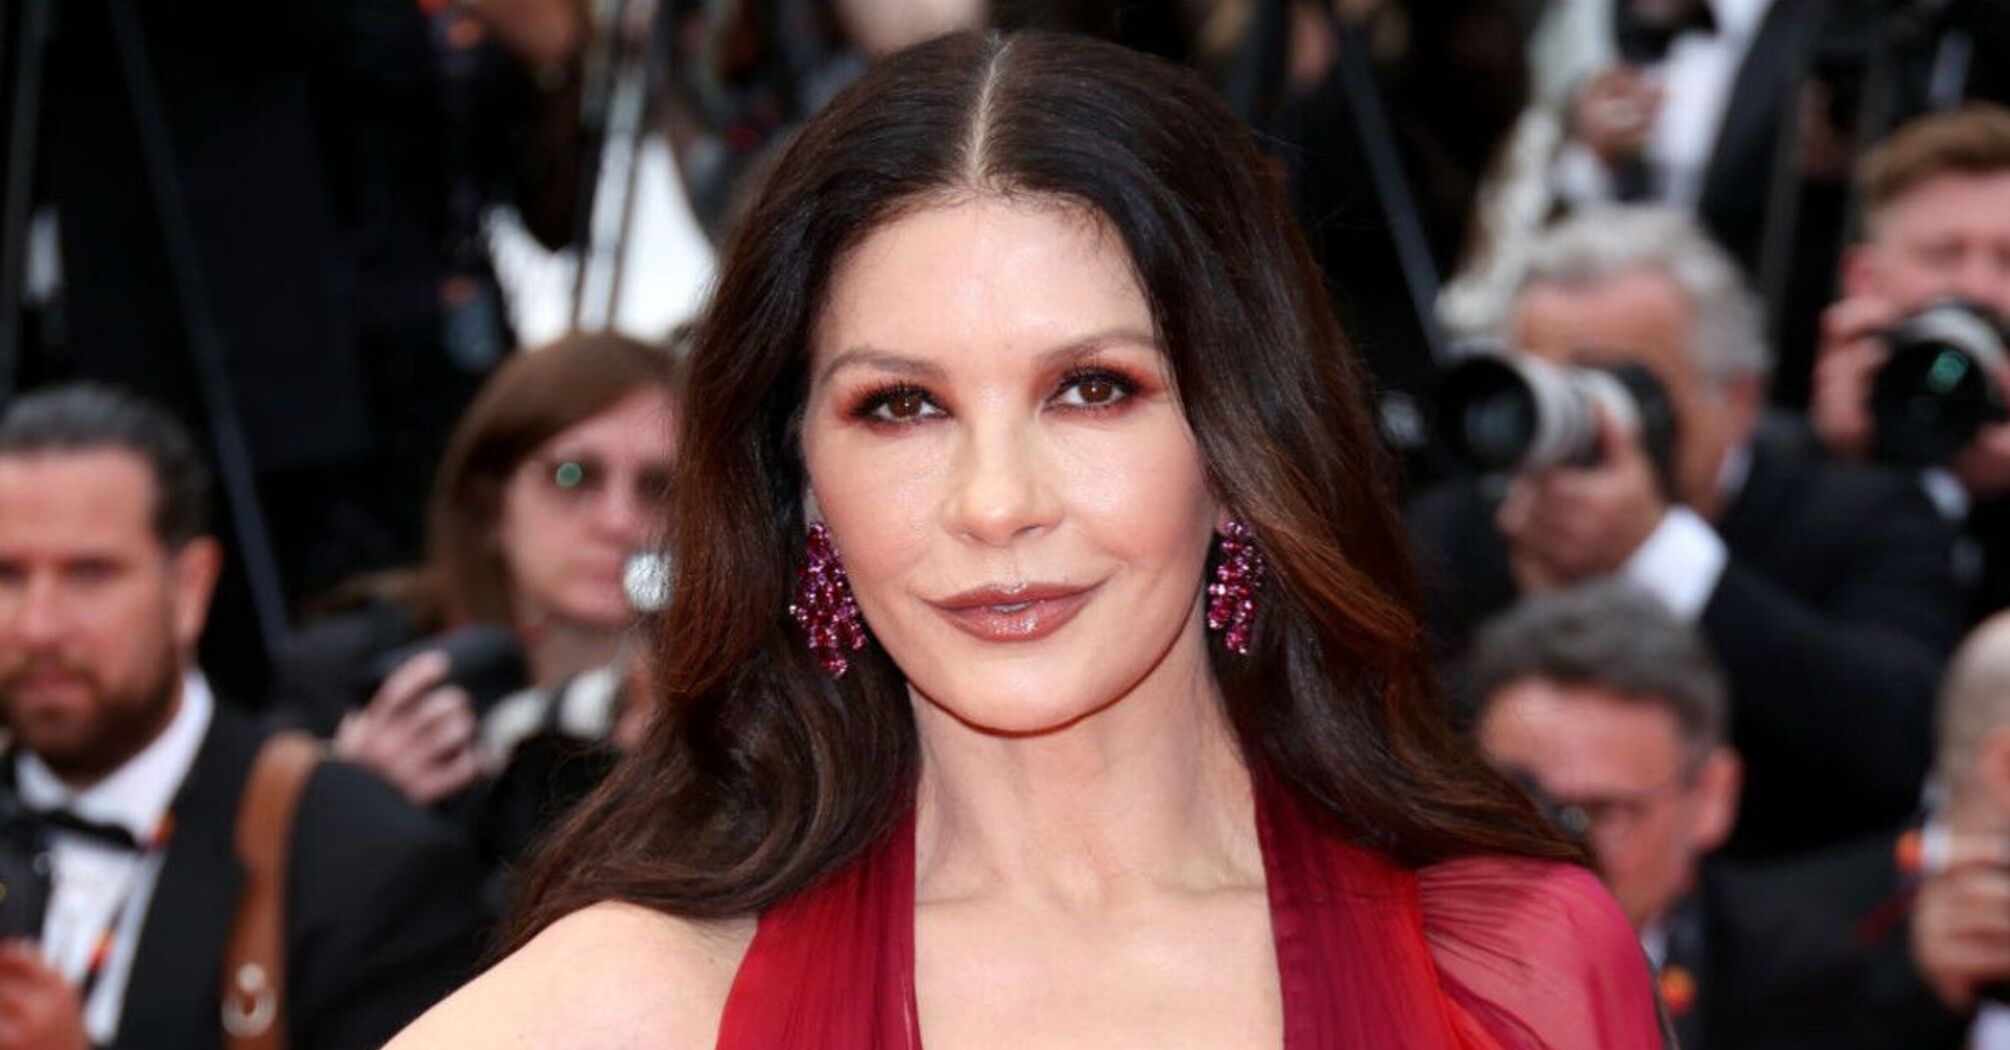 Catherine Zeta-Jones: 5 surprising facts you didn't know about this famous actress